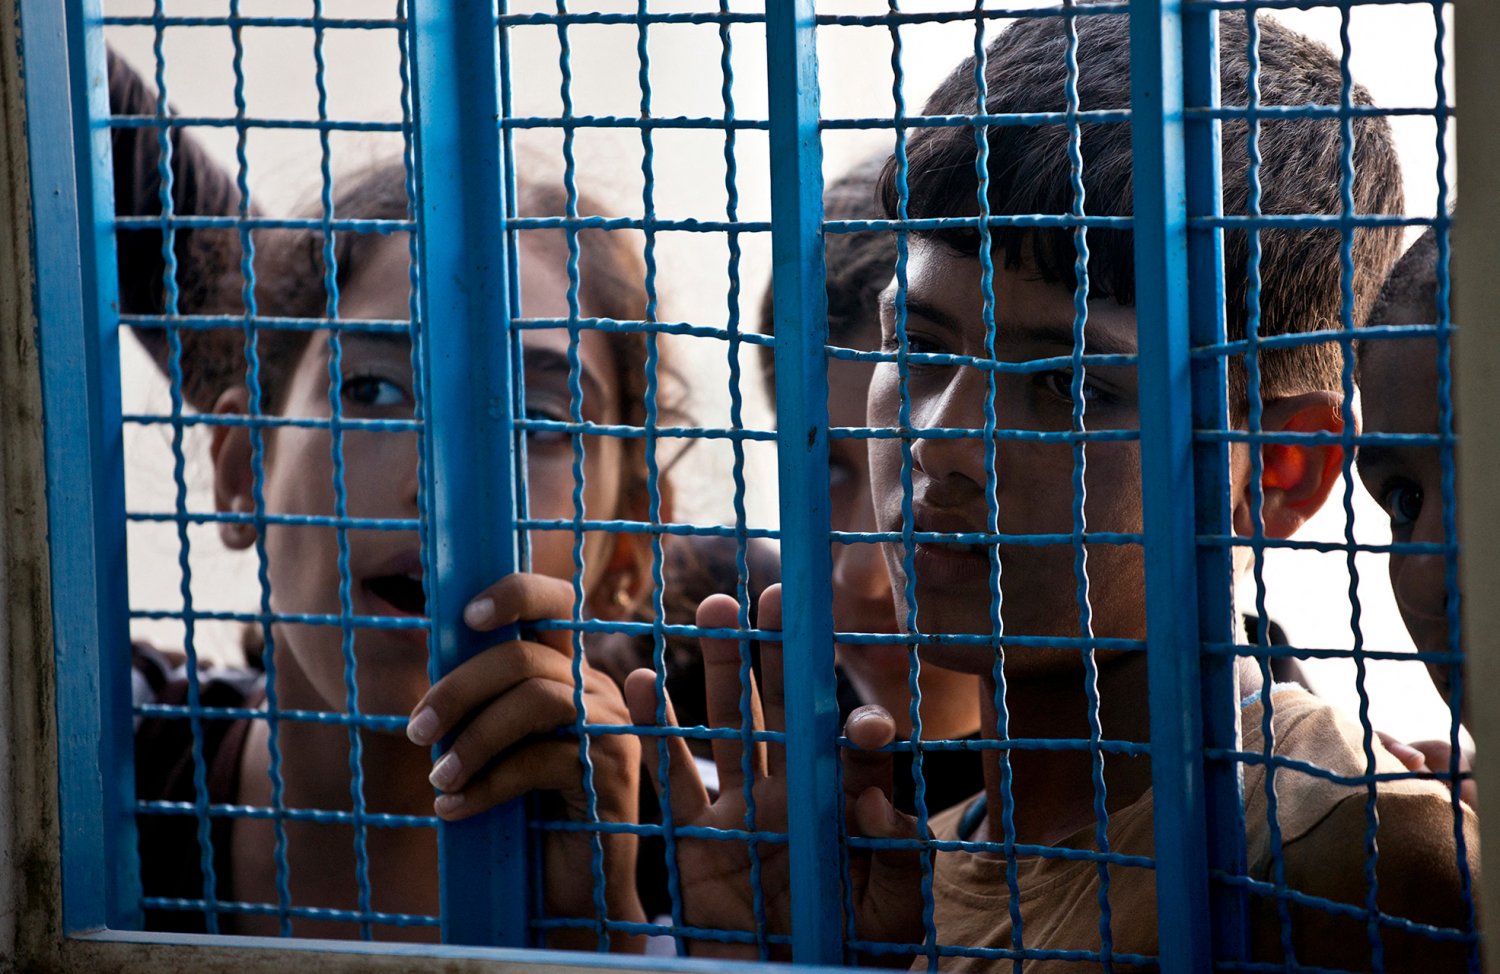 Palestinian children look out from iron caging